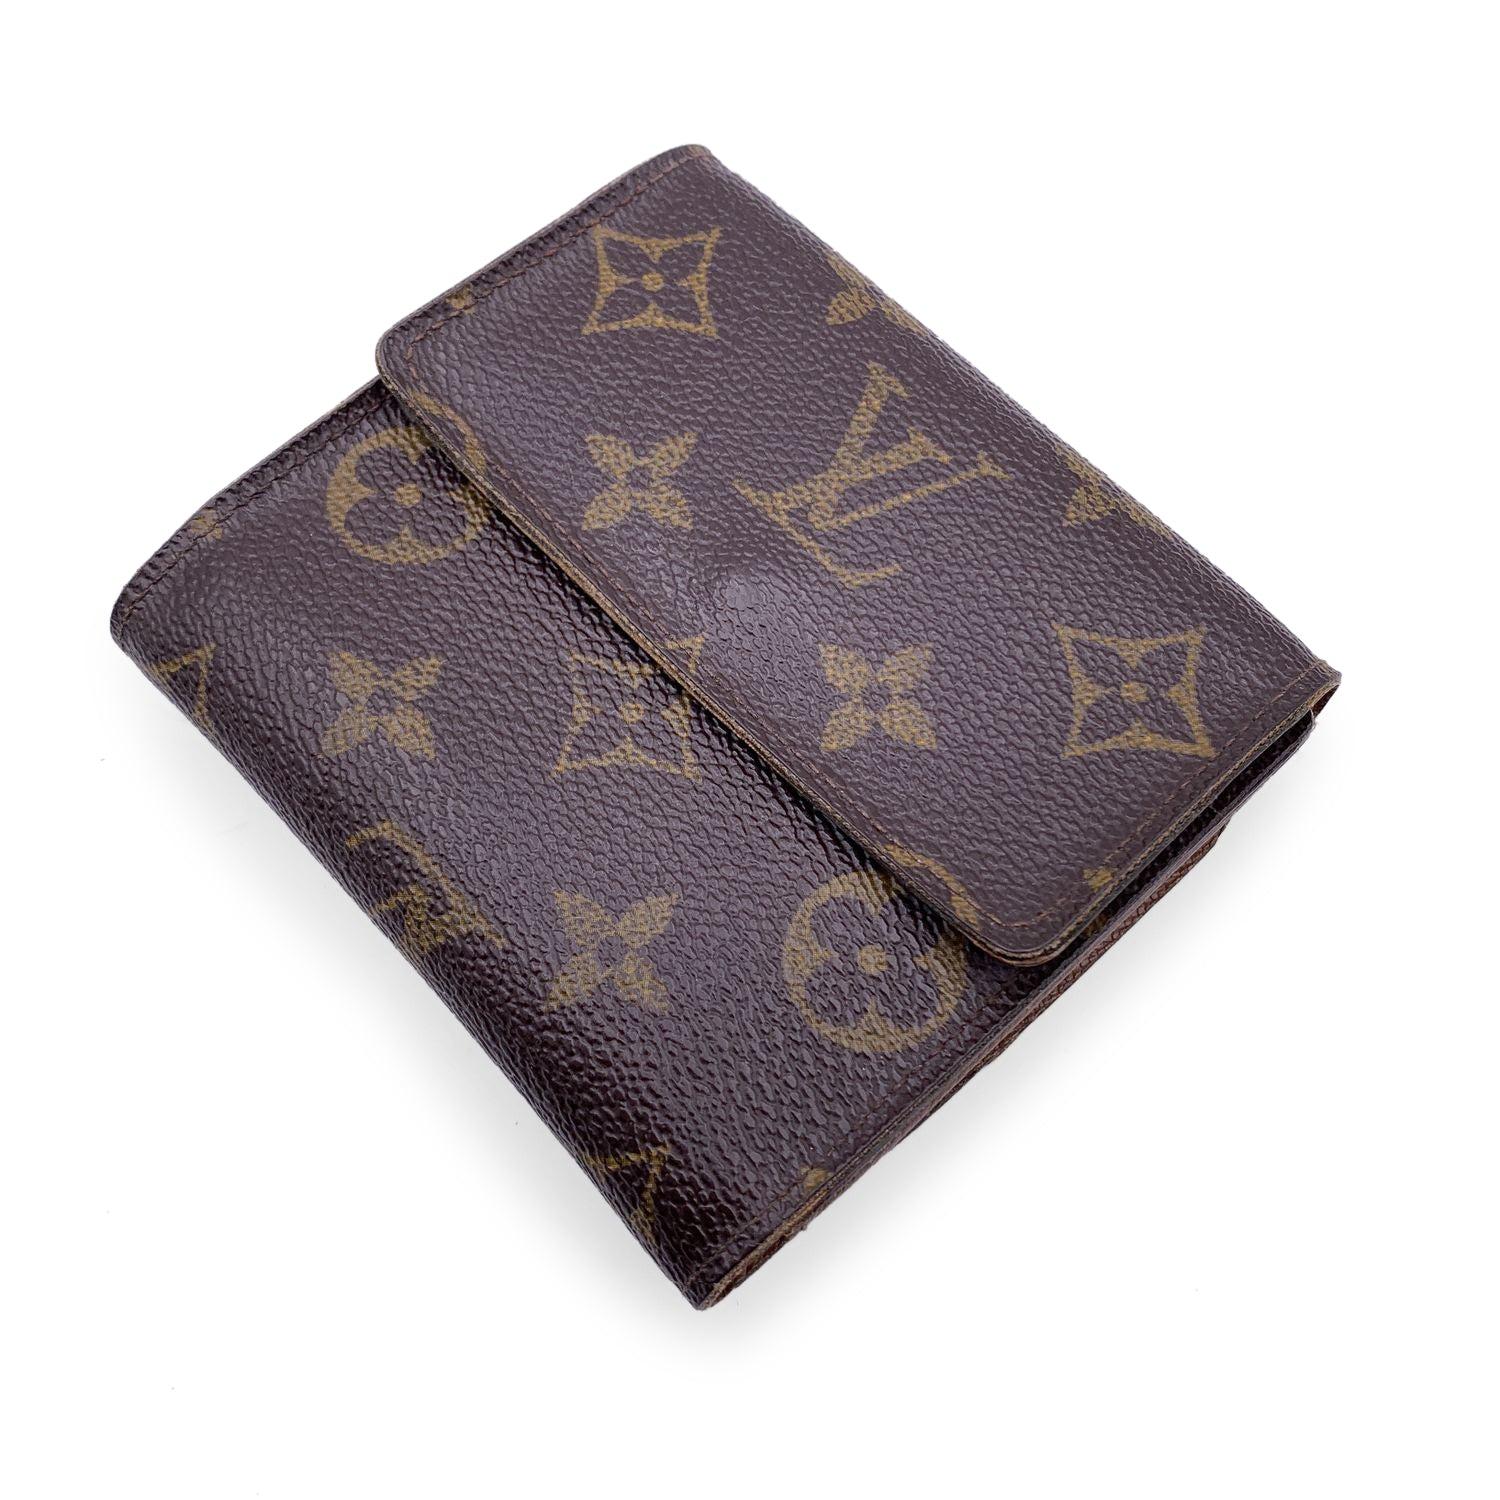 Louis Vuitton 'Elise' square-shaped wallet with double side flap, mode. M61654. Crafted in brown monogram canvas. Tan leather lining. 1 coin compartment on a side and a bifold section on the other side, with 1 bill compartment, 6 credit card slots